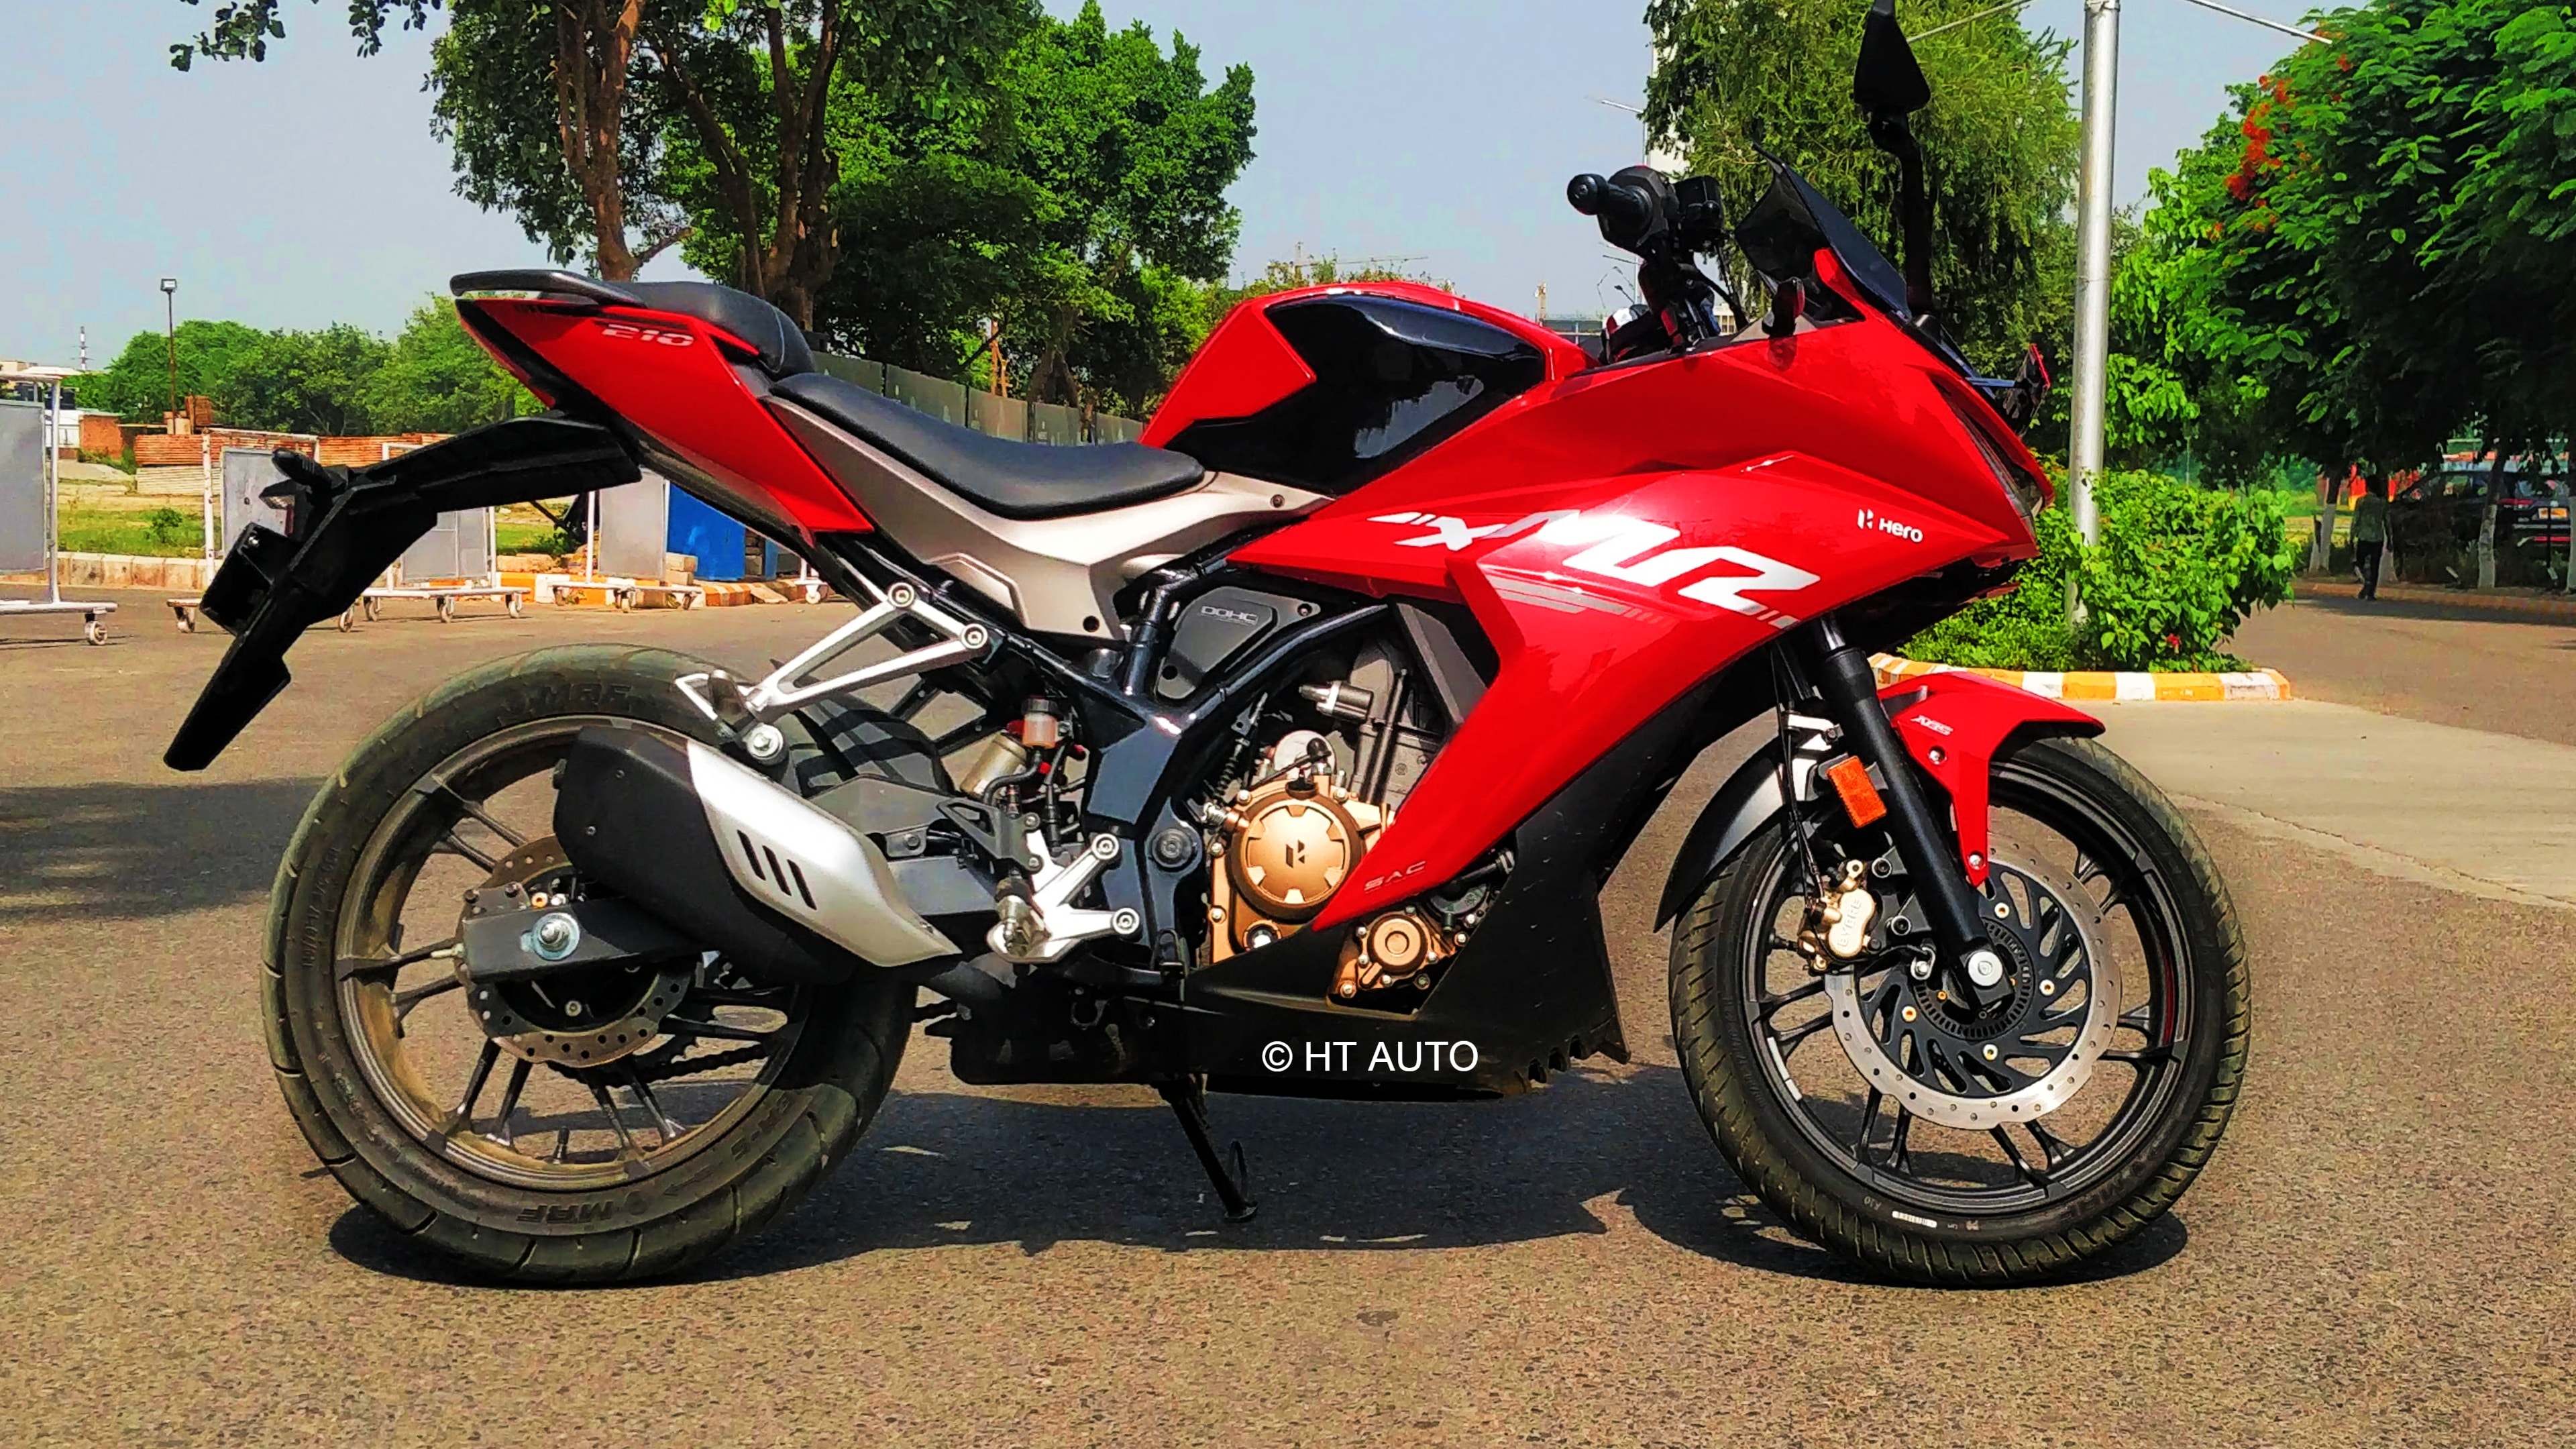 The Karizma XMR gets a pliant ride quality that keeps up with most undulations. USD forks though are missed, which would've offered more feedback from the front